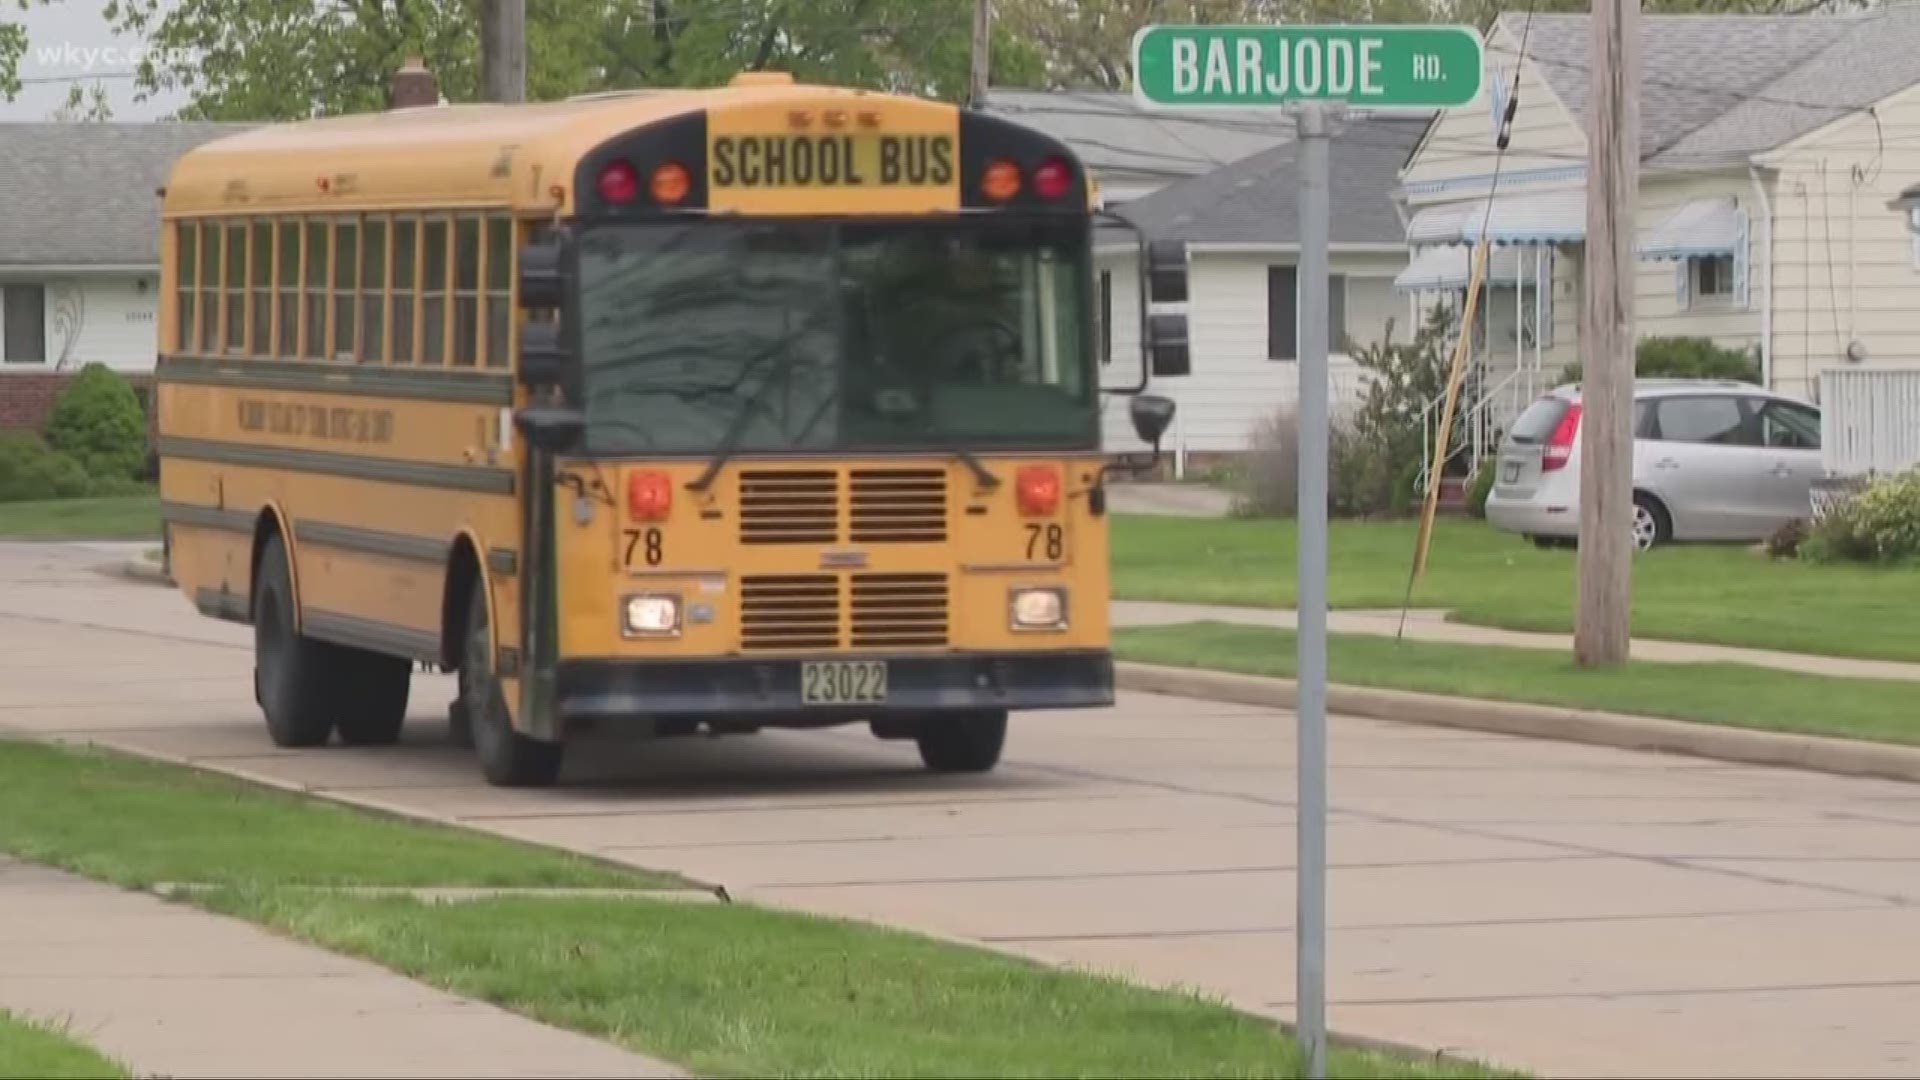 A councilman is proposing stricter penalties for those who put children in danger by ignoring bus laws.